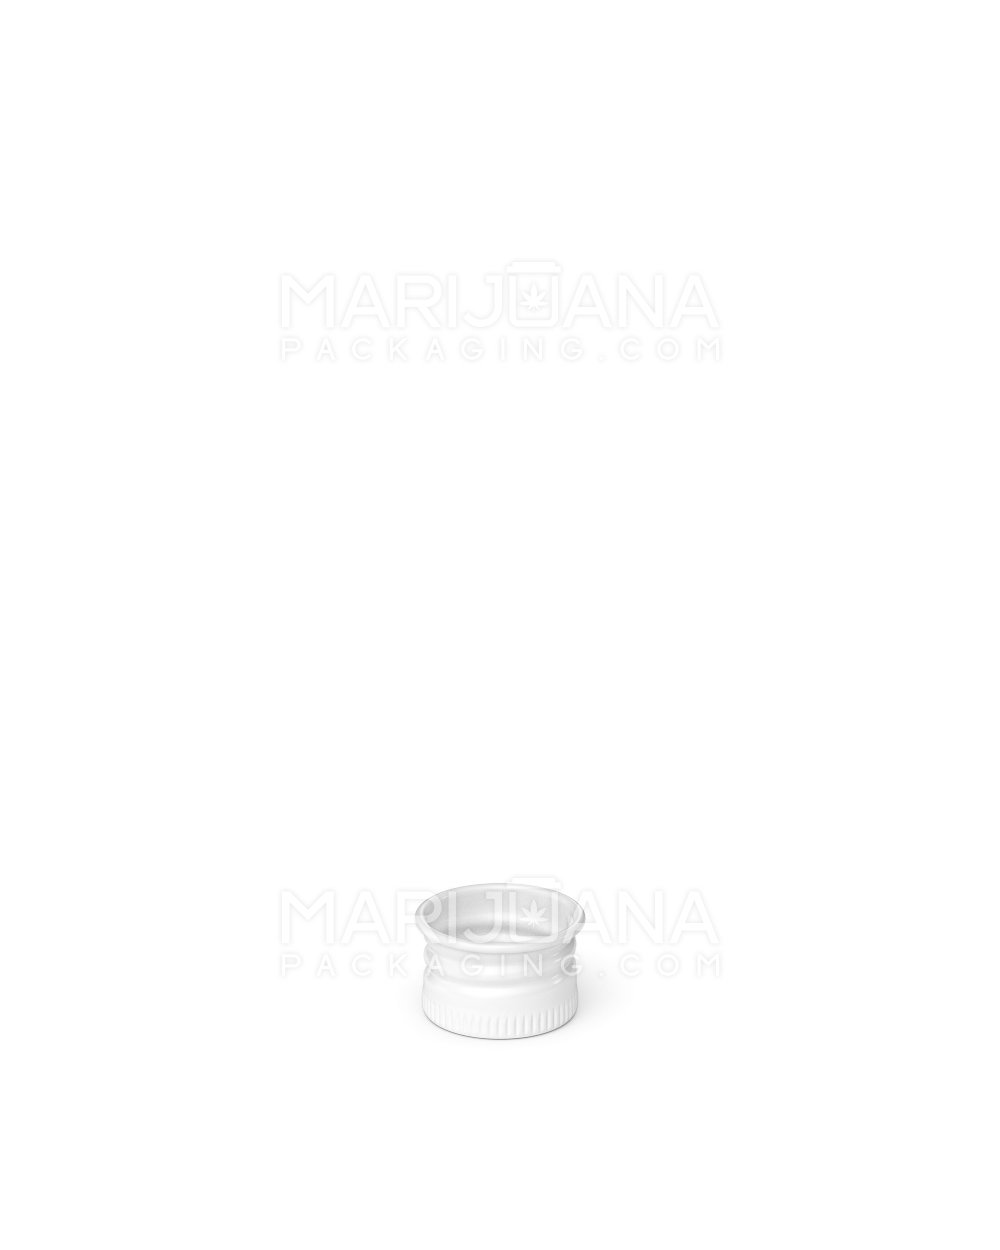 Ribbed Screw Top Metal Caps w/ Foam Liner | 18mm - Glossy White - 400 Count - 4